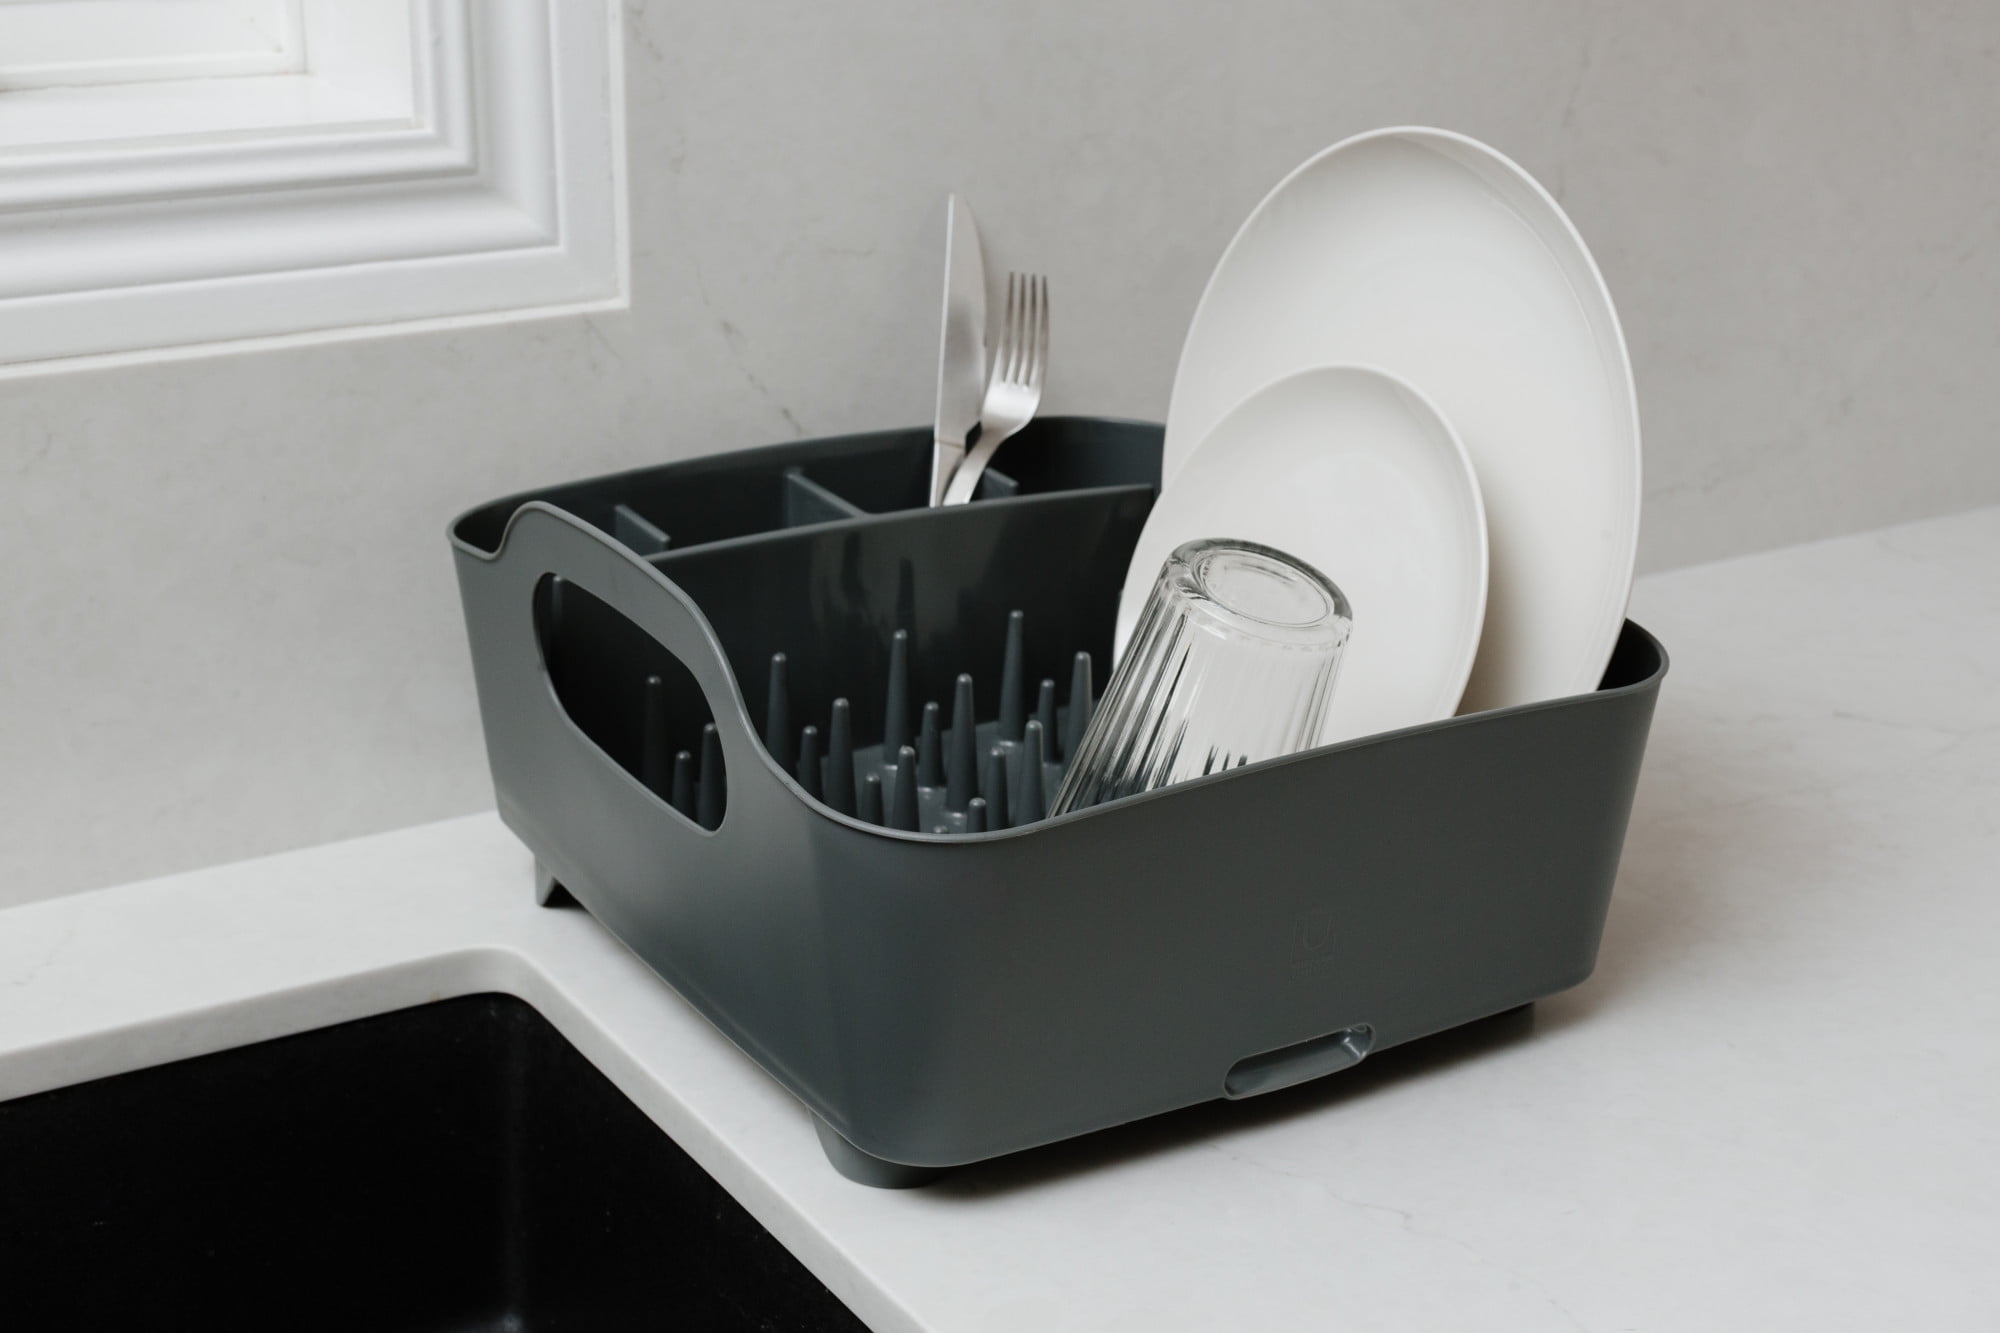 Umbra Holster Charcoal Dish Rack 1008163-149 - The Home Depot